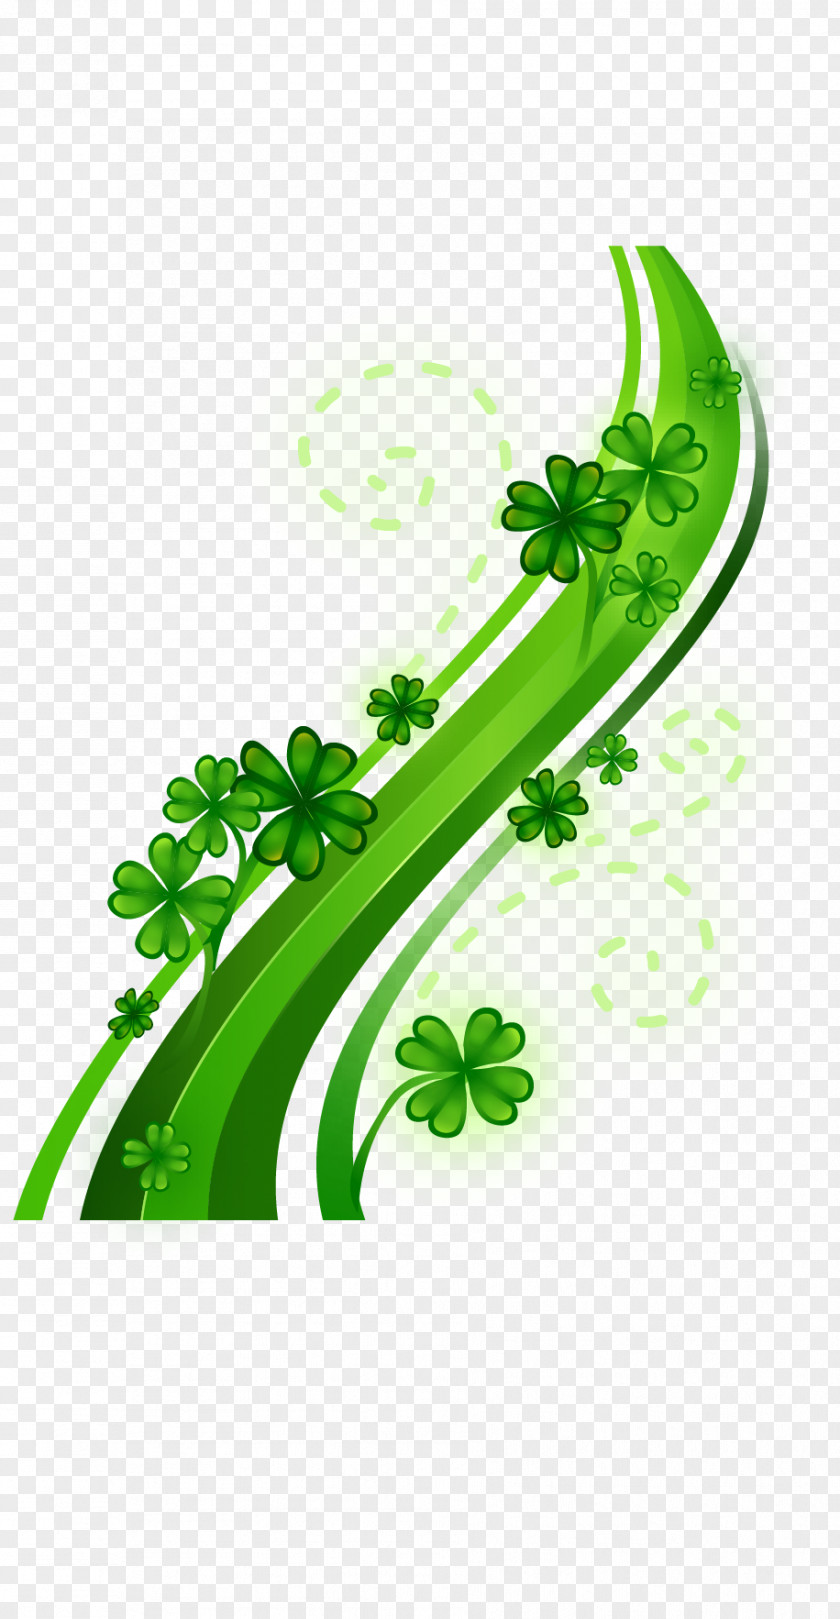 Cartoon Painted Fresh Clover PNG